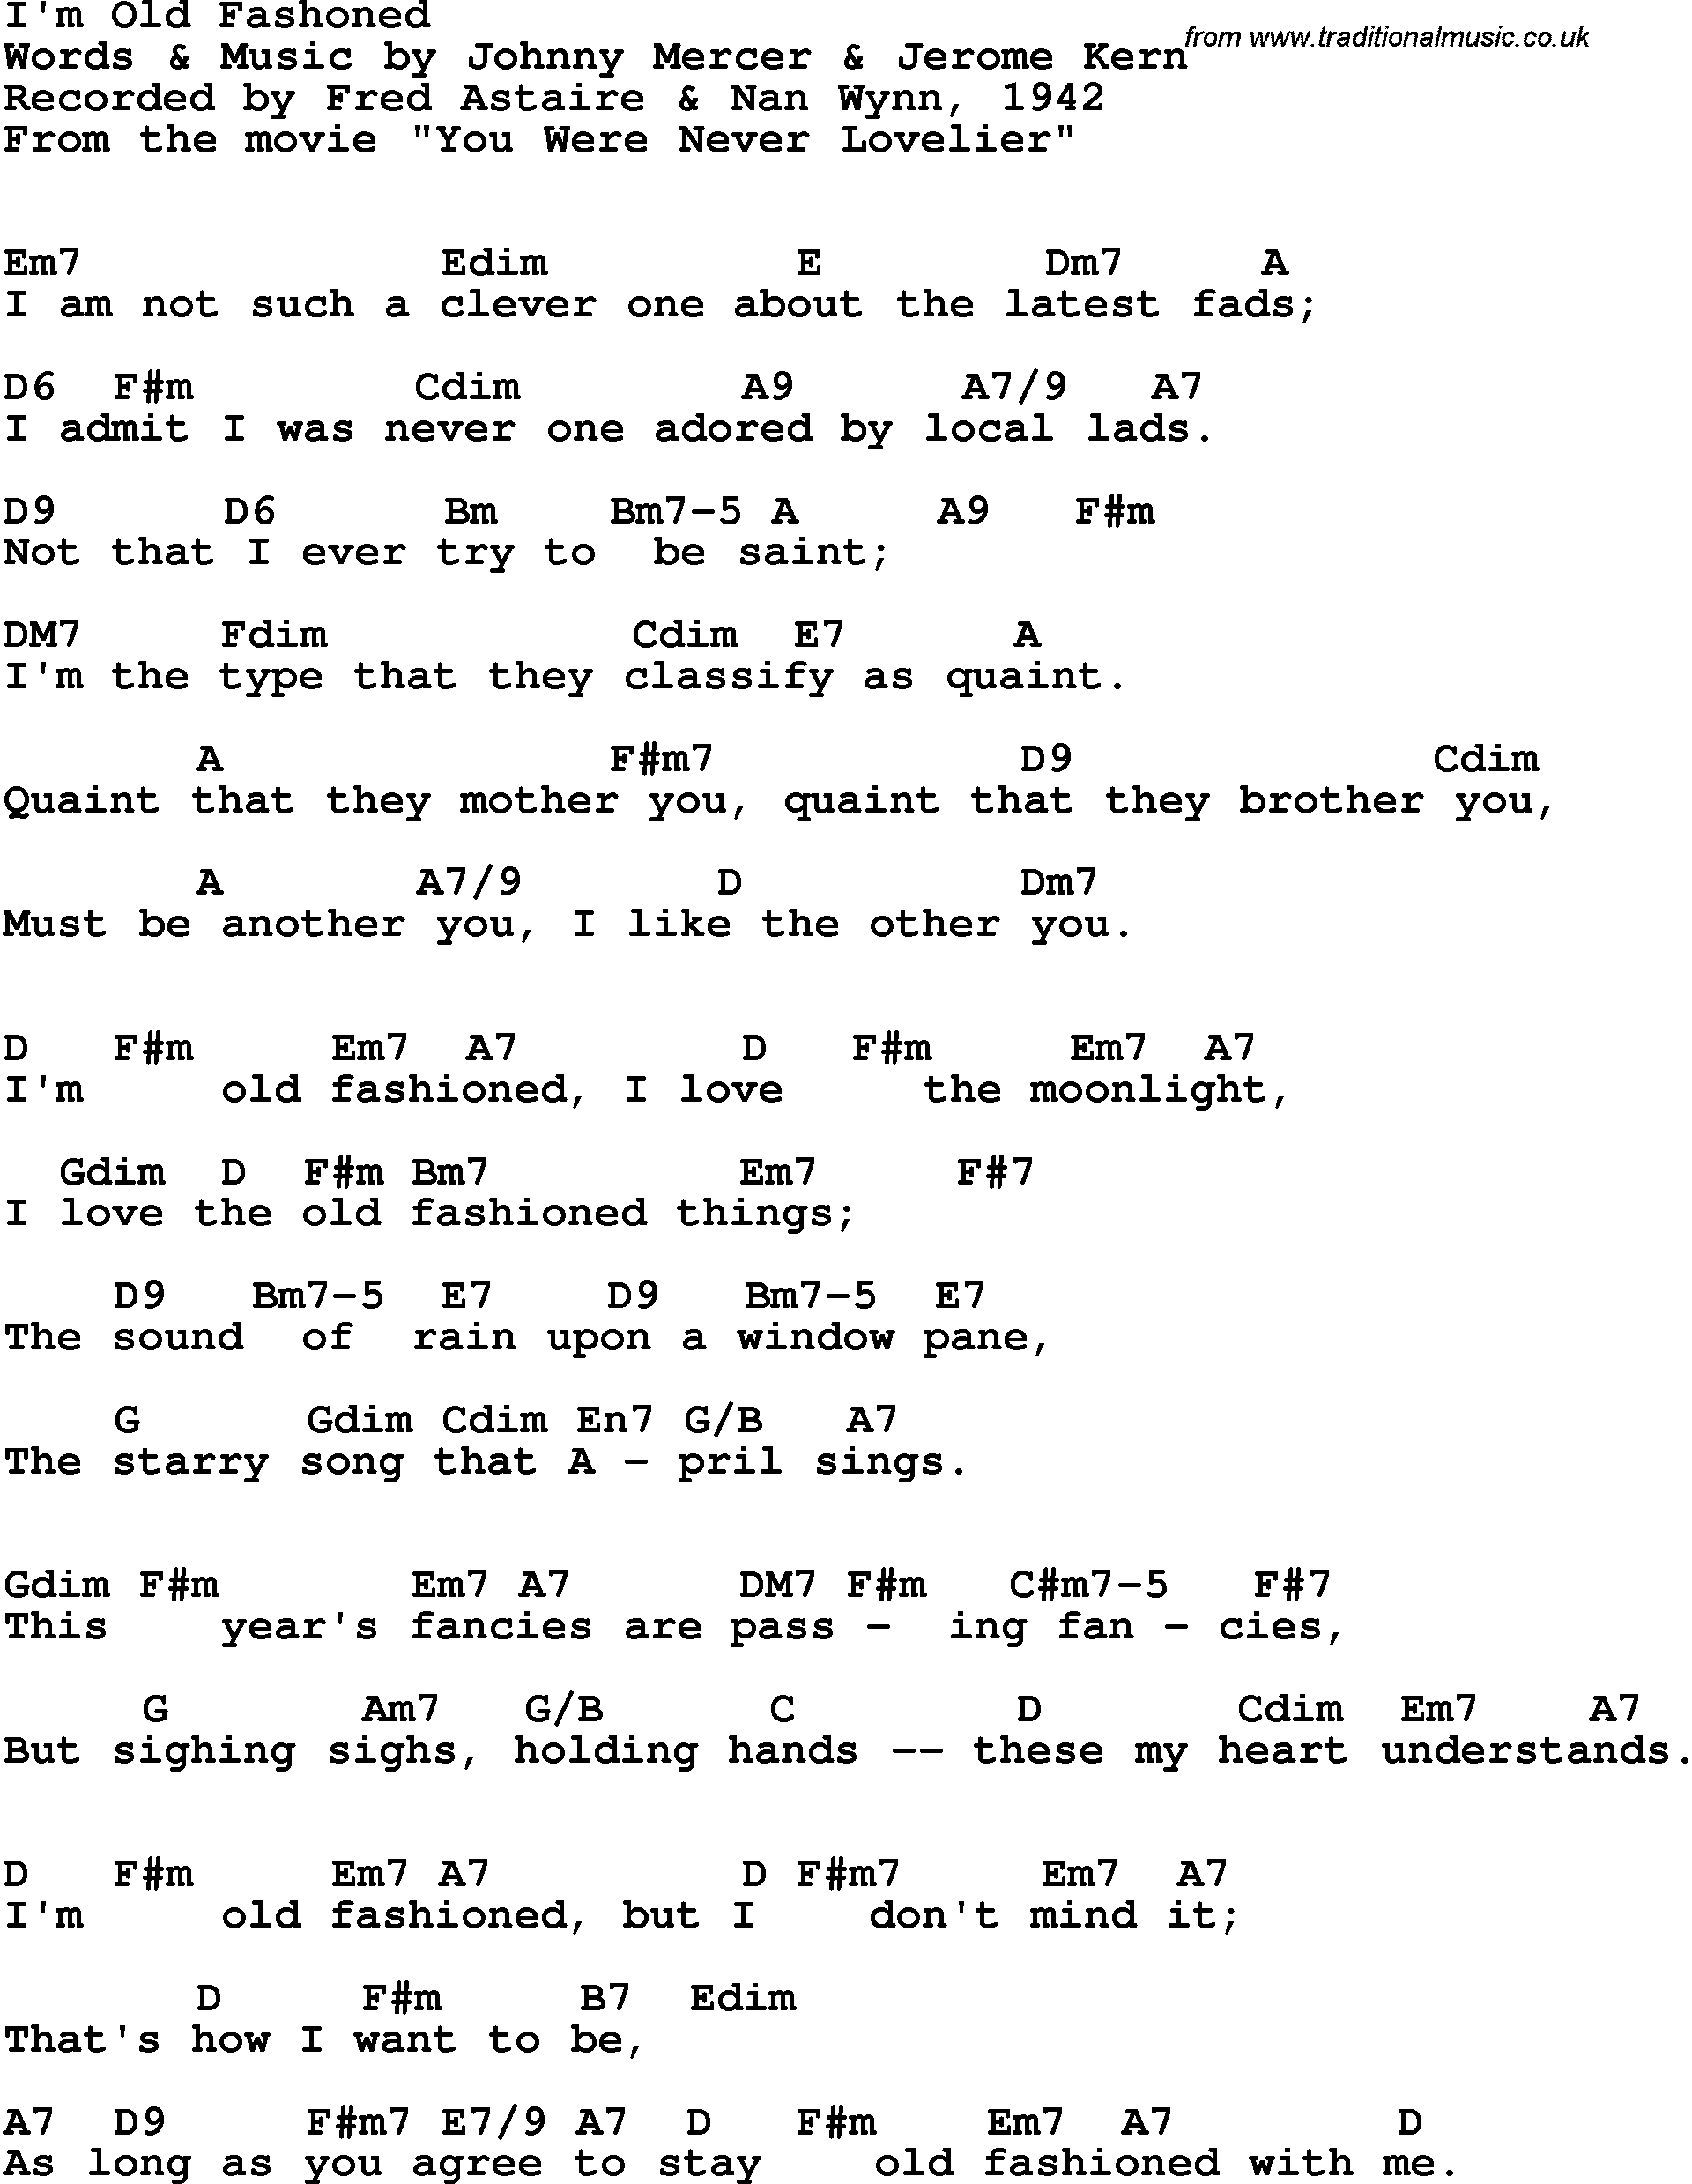 Song Lyrics with guitar chords for I'm Old Fashoned - Fred Astaire & Nan Wynn, 1942